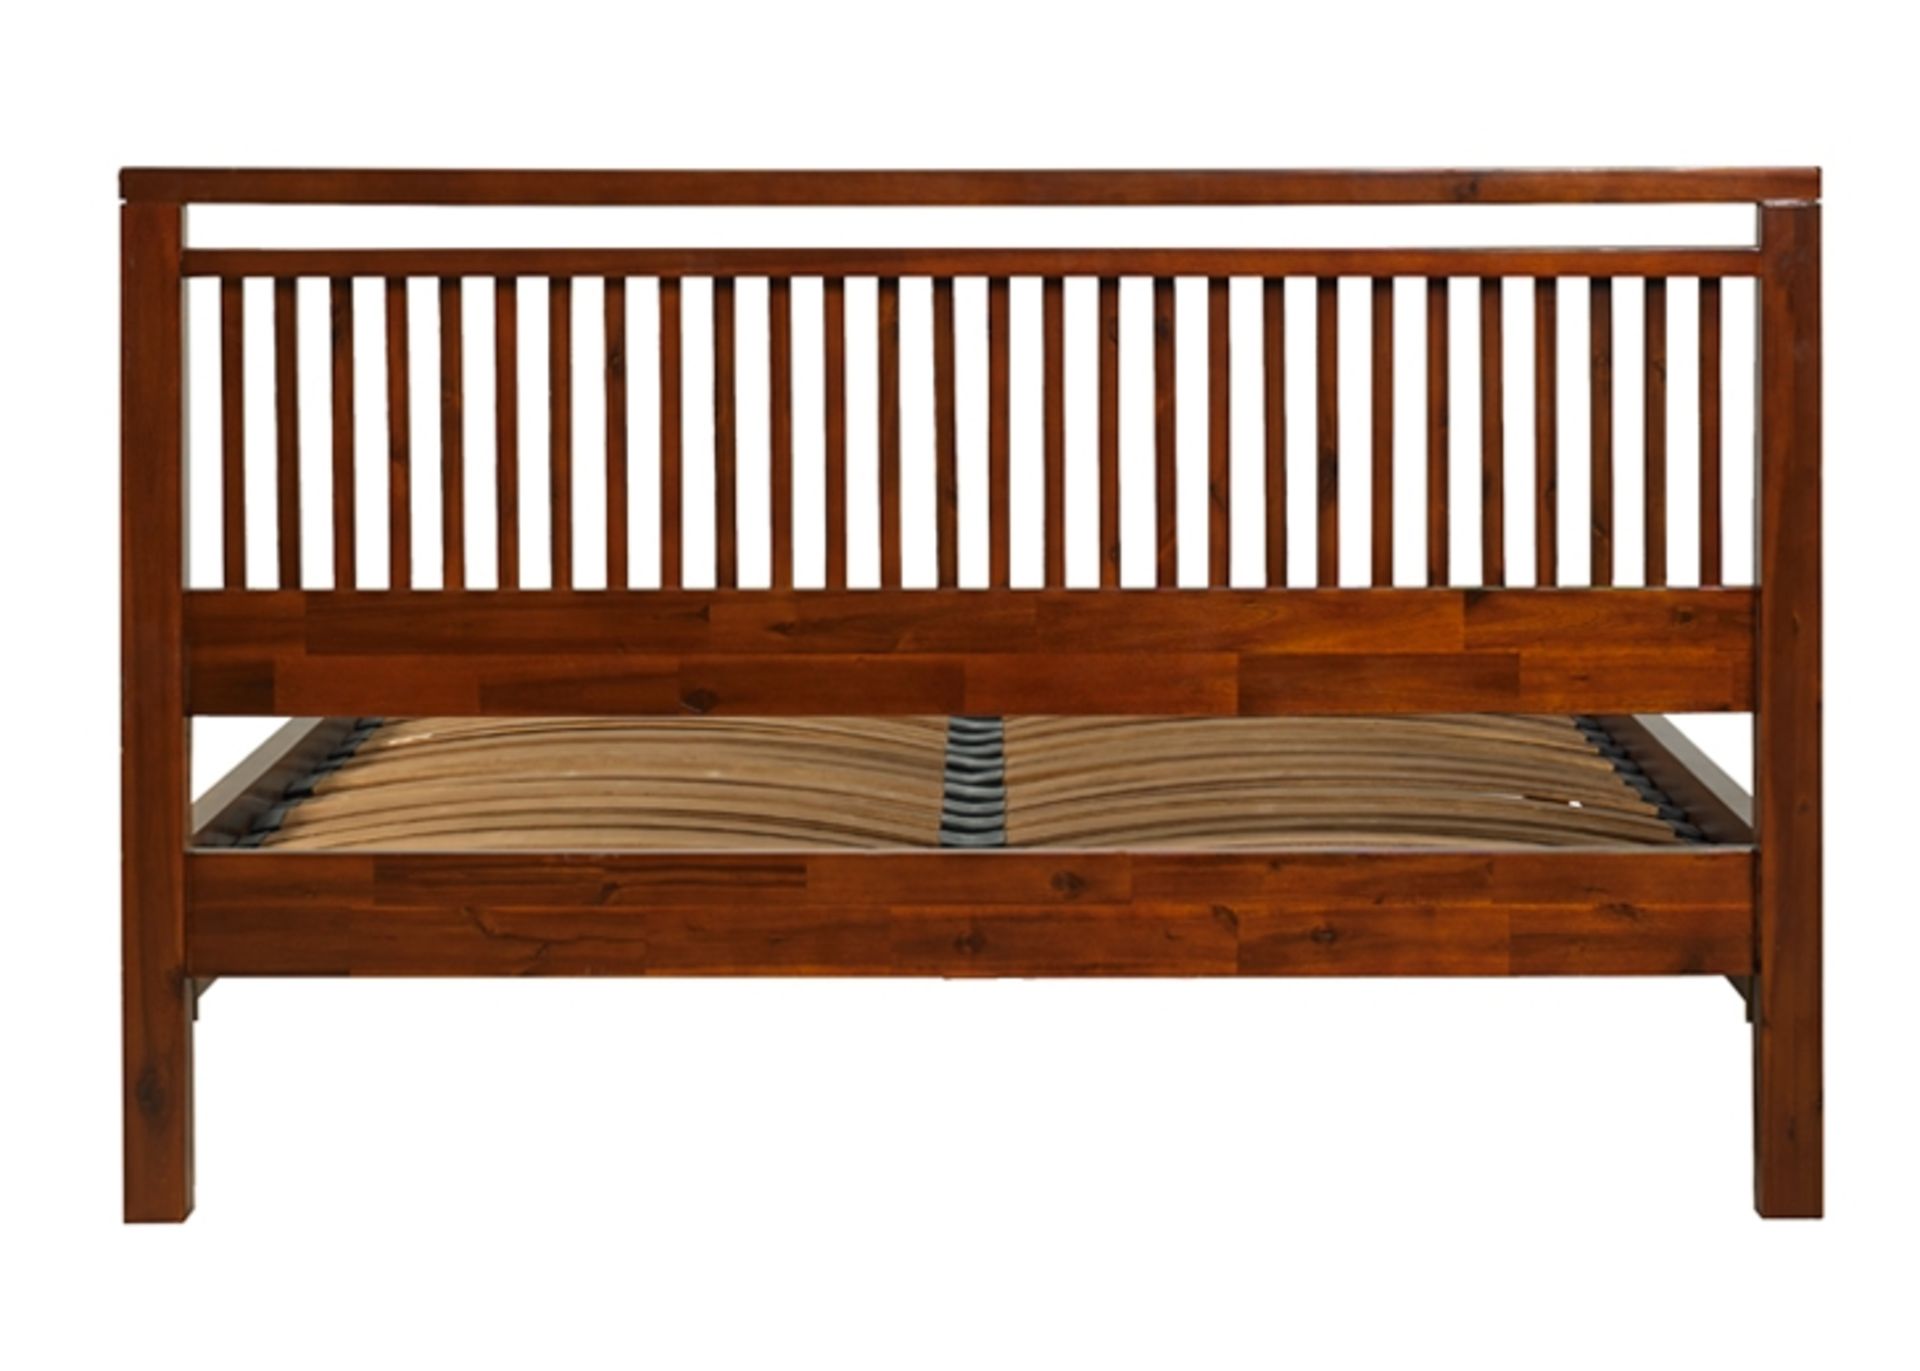 1 x Mark Webster Korutla 6ft King Size Bed Frame - Beautifully Crafted From Solid Acacia Wood - - Image 3 of 3